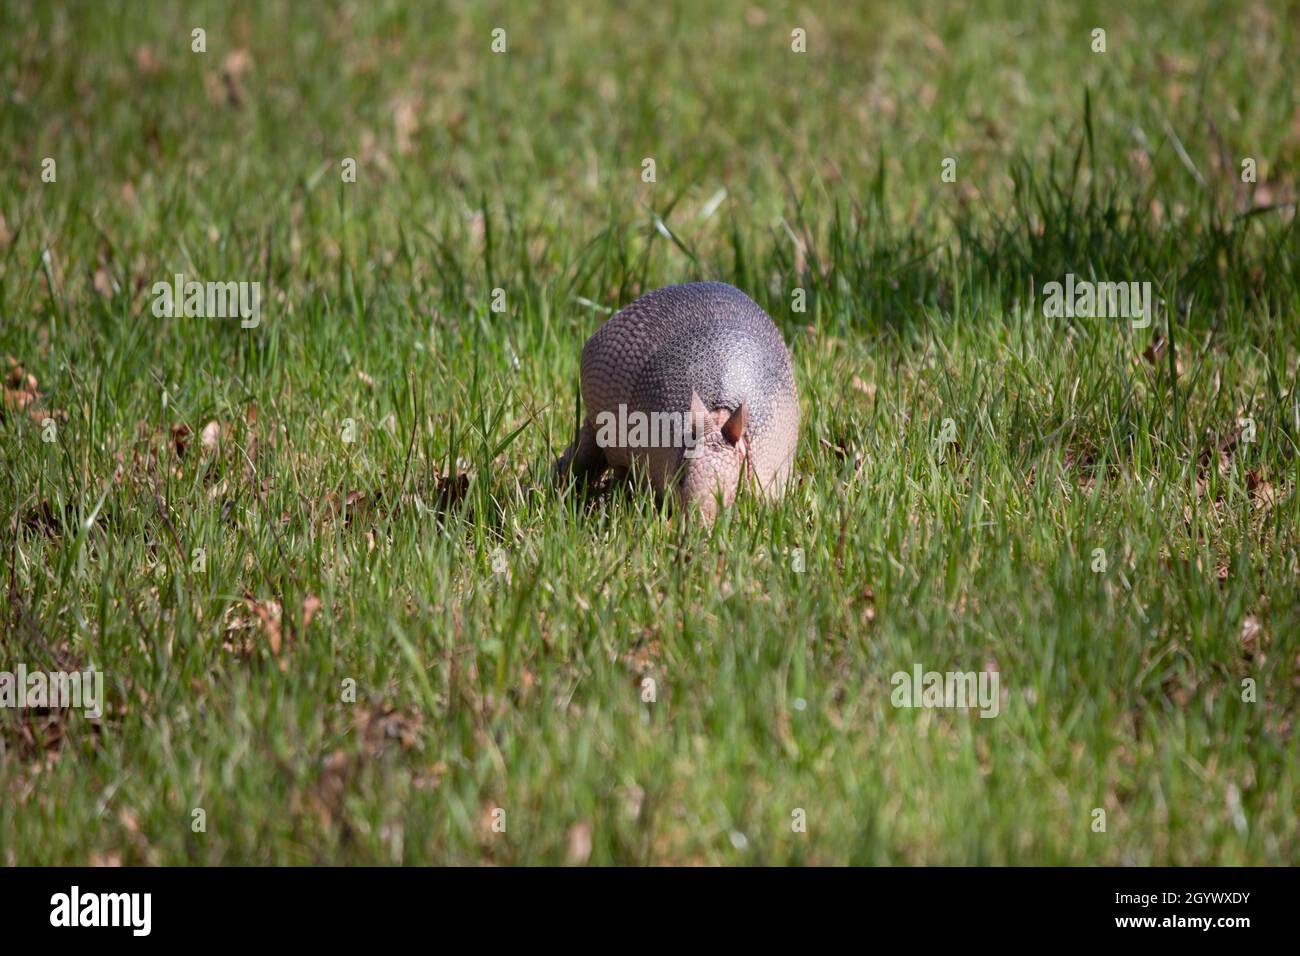 Nine-banded armadillo (Dasypus novemcinctus) foraging for insects in green grass in an open field Stock Photo